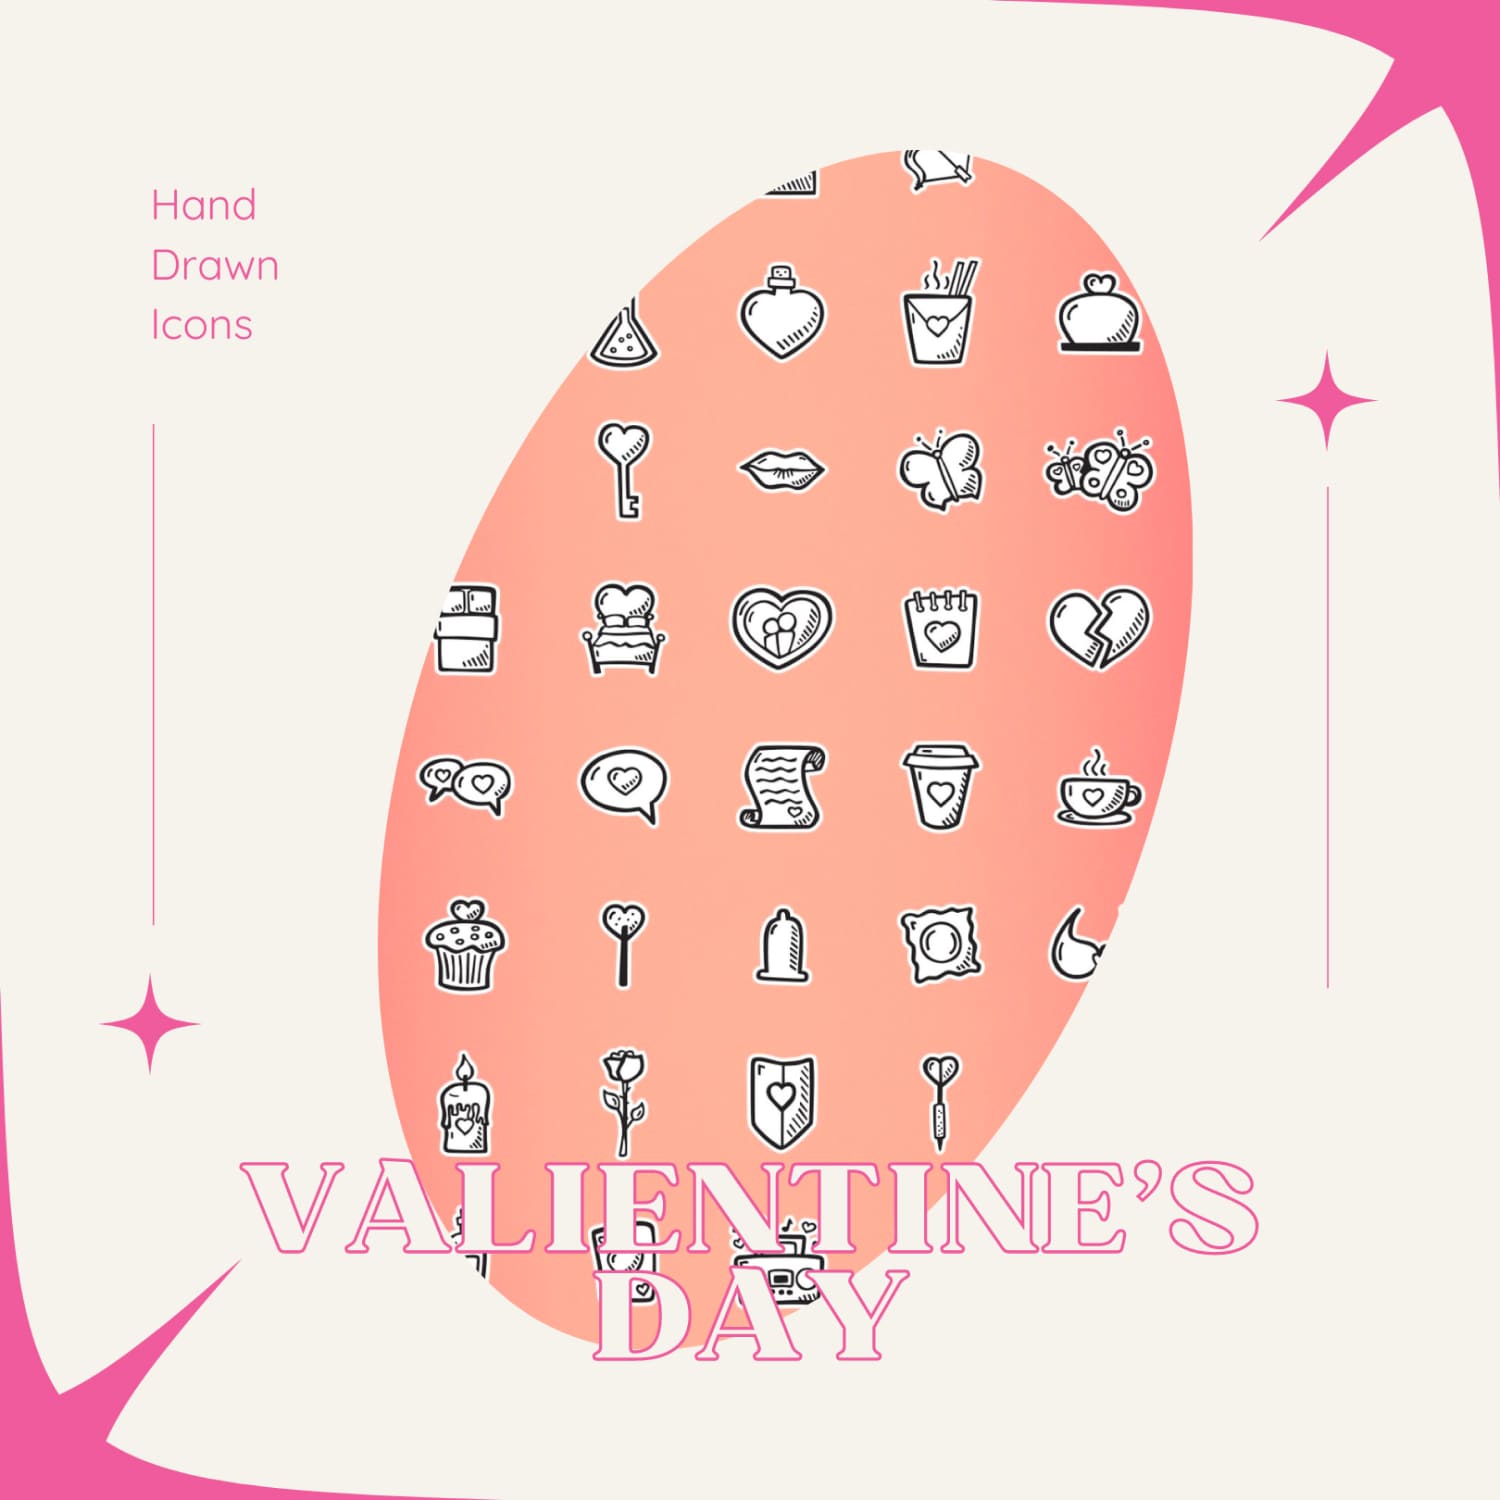 Valientine's Day - Hand Drawn Icons.